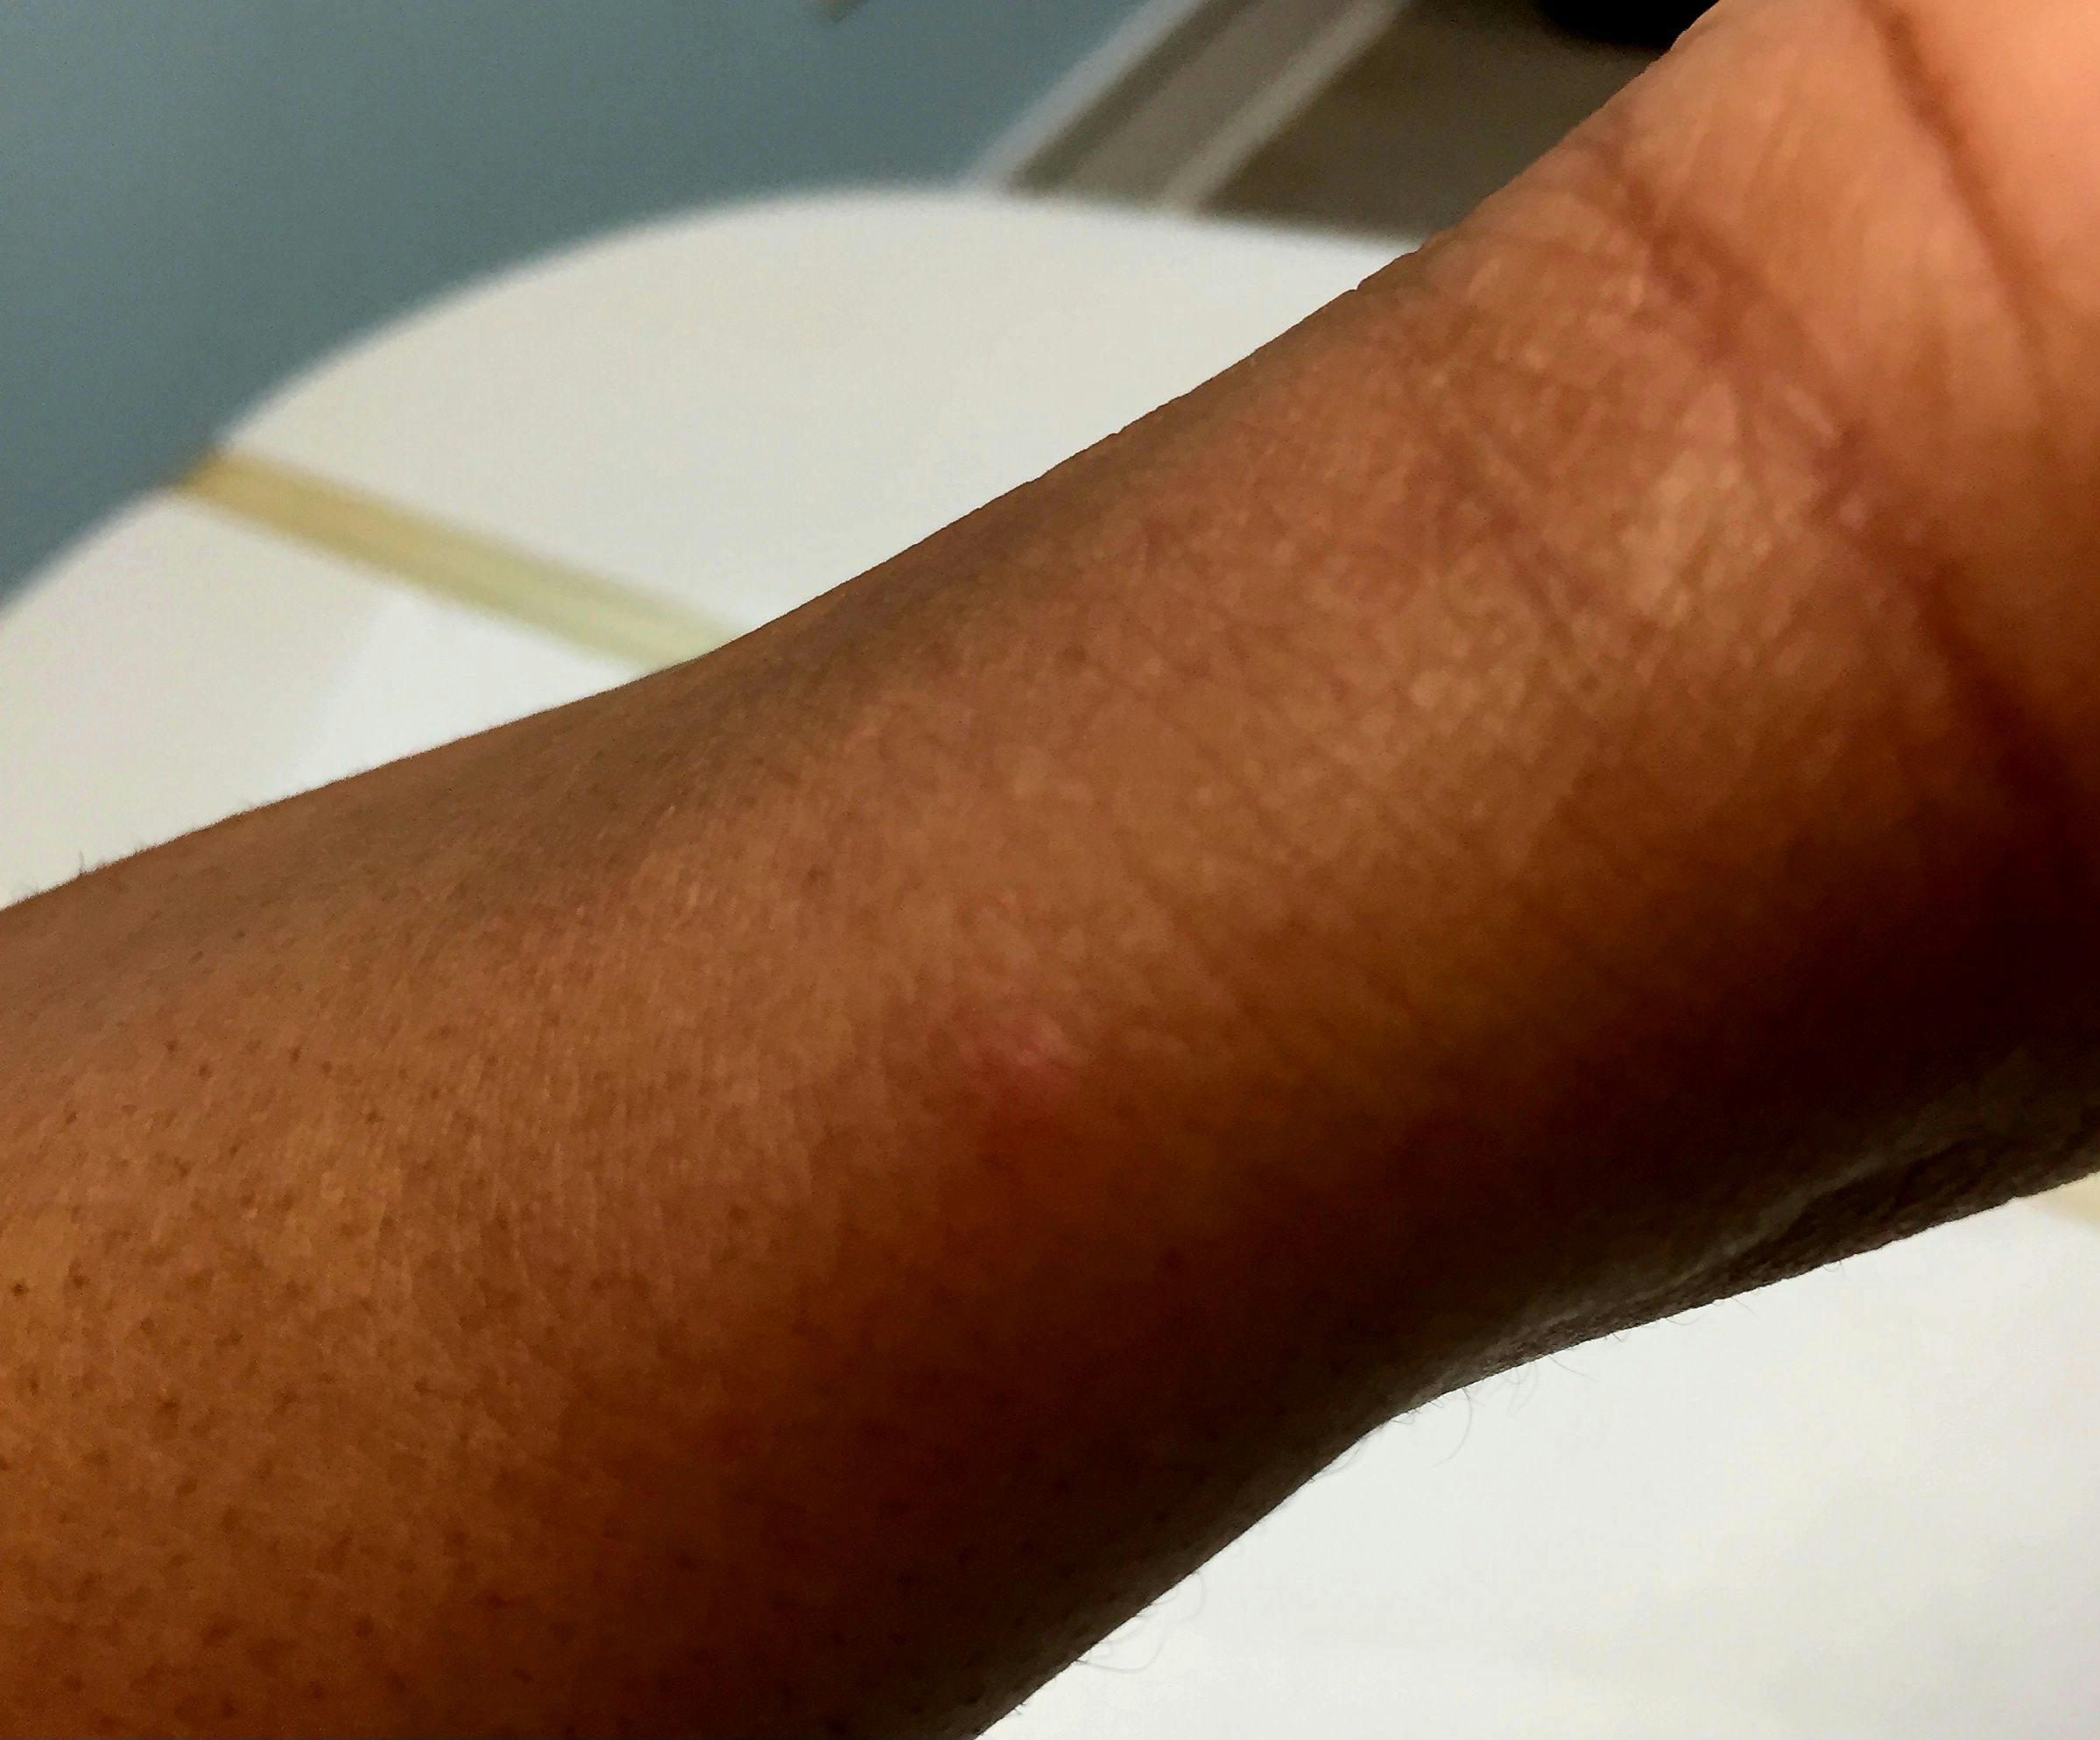 Mosquito bite on a patient with skin of color

Image courtesy of Block